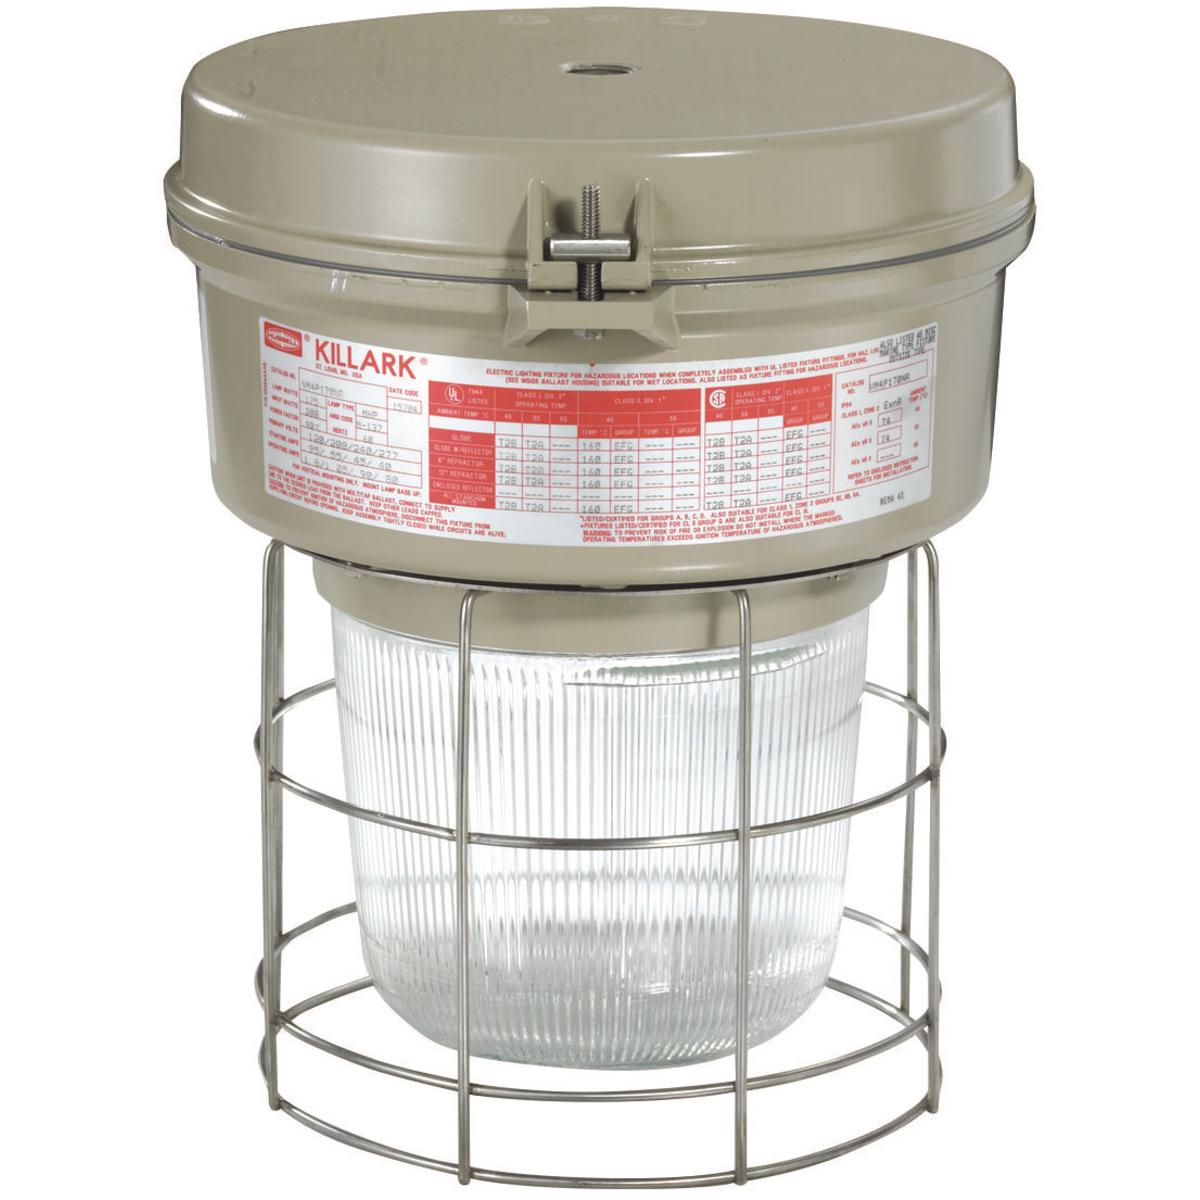 Hubbell VM4S155A2GLG VM4 Series - 150W High Pressure Sodium 480V - 3/4" Pendant - Globe and Guard  ; Ballast tank and splice box – corrosion resistant copper-free aluminum alloy with baked powder epoxy/polyester finish, electrostatically applied for complete, uniform corrosio